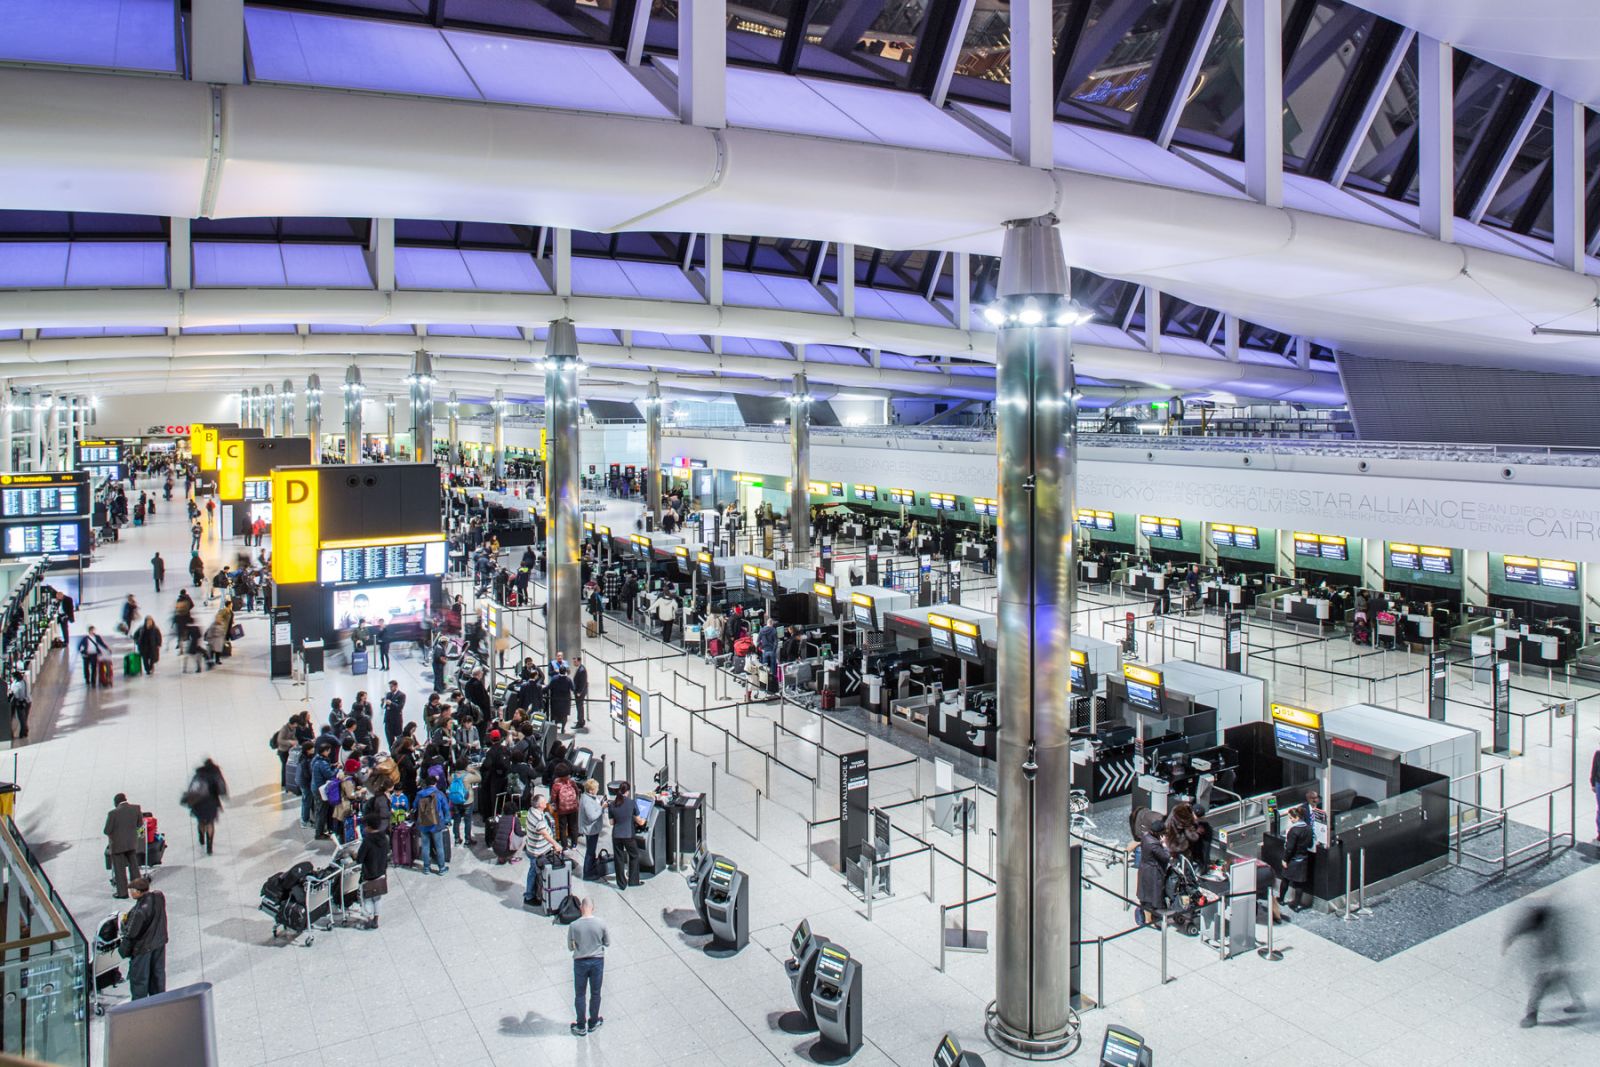 Second Heathrow Airport strike could upend May Day holiday travel